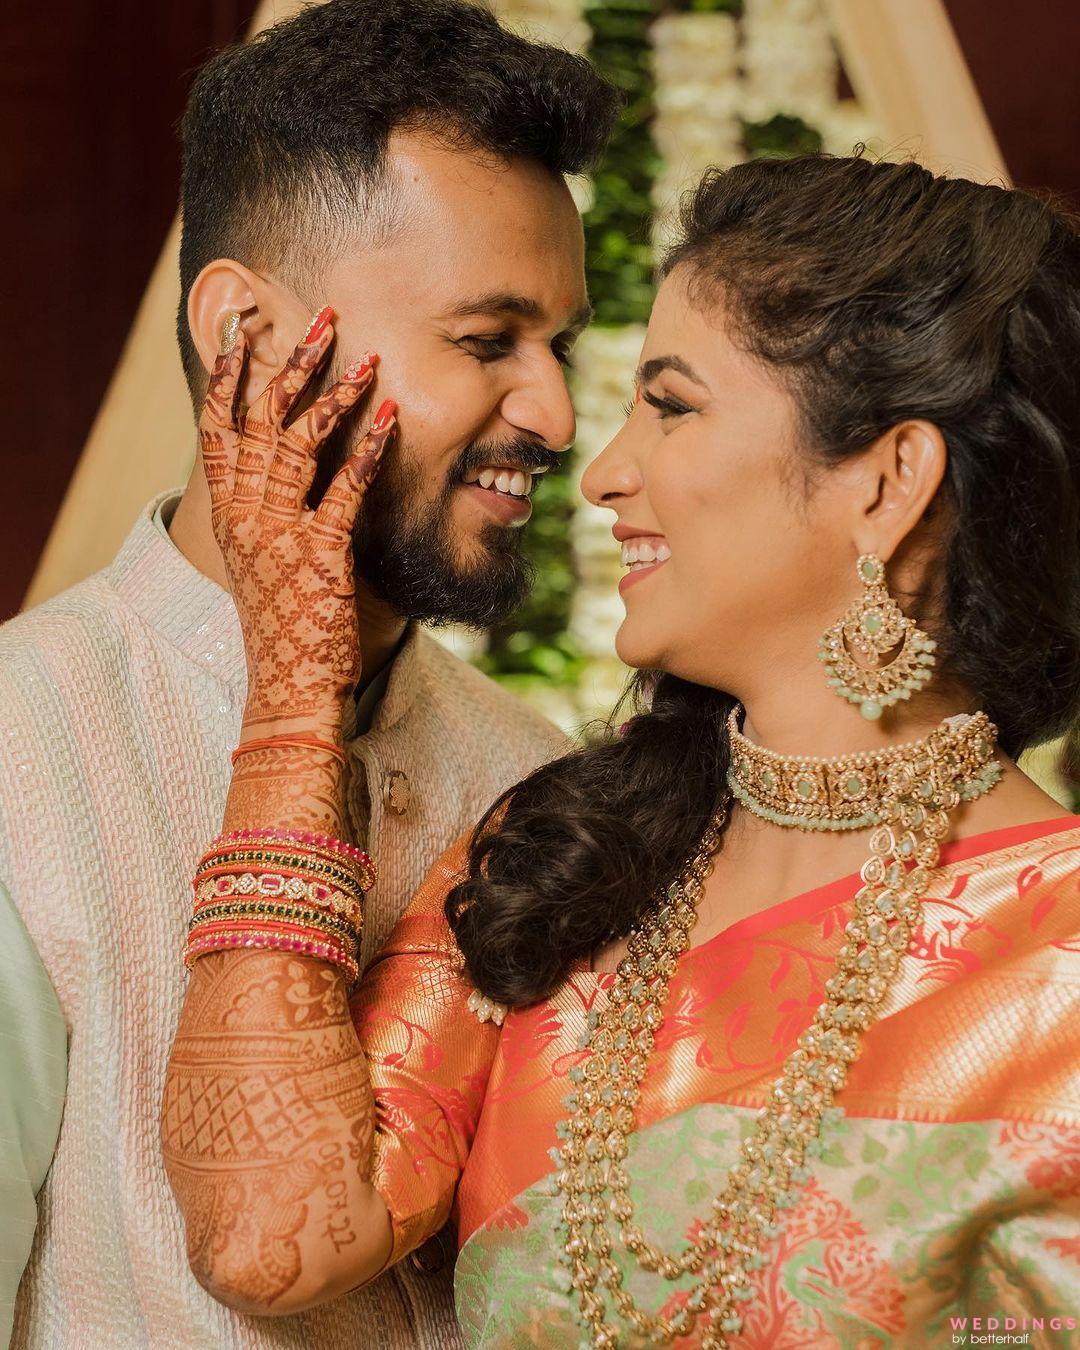 Can't Stop Smiling Looking At These Adorable South Indian Couple Shots! |  Indian wedding garland, Indian wedding couple, Indian wedding photography